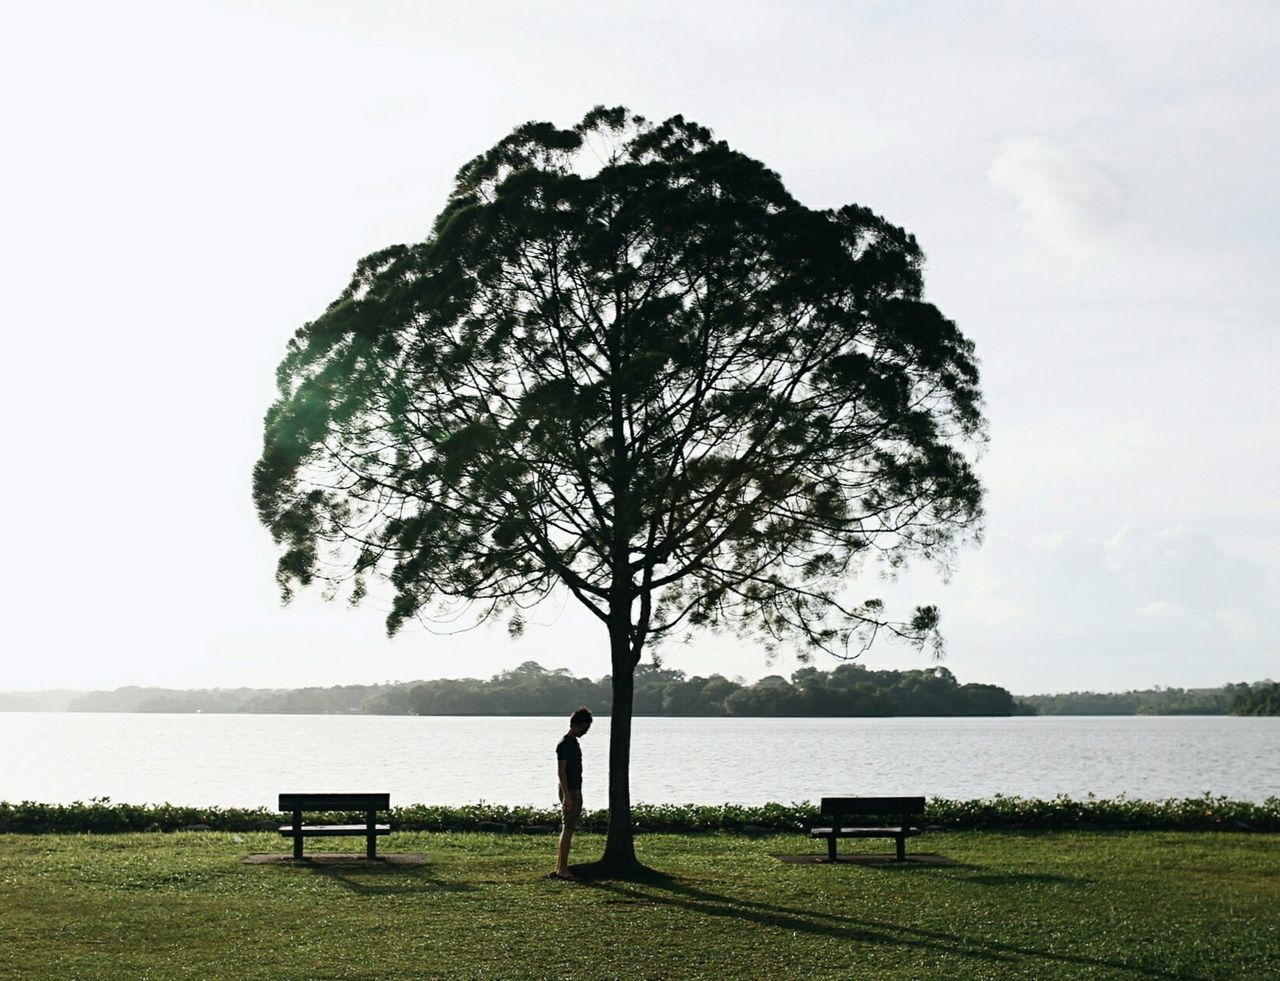 Scenic view of calm lake with trees in background